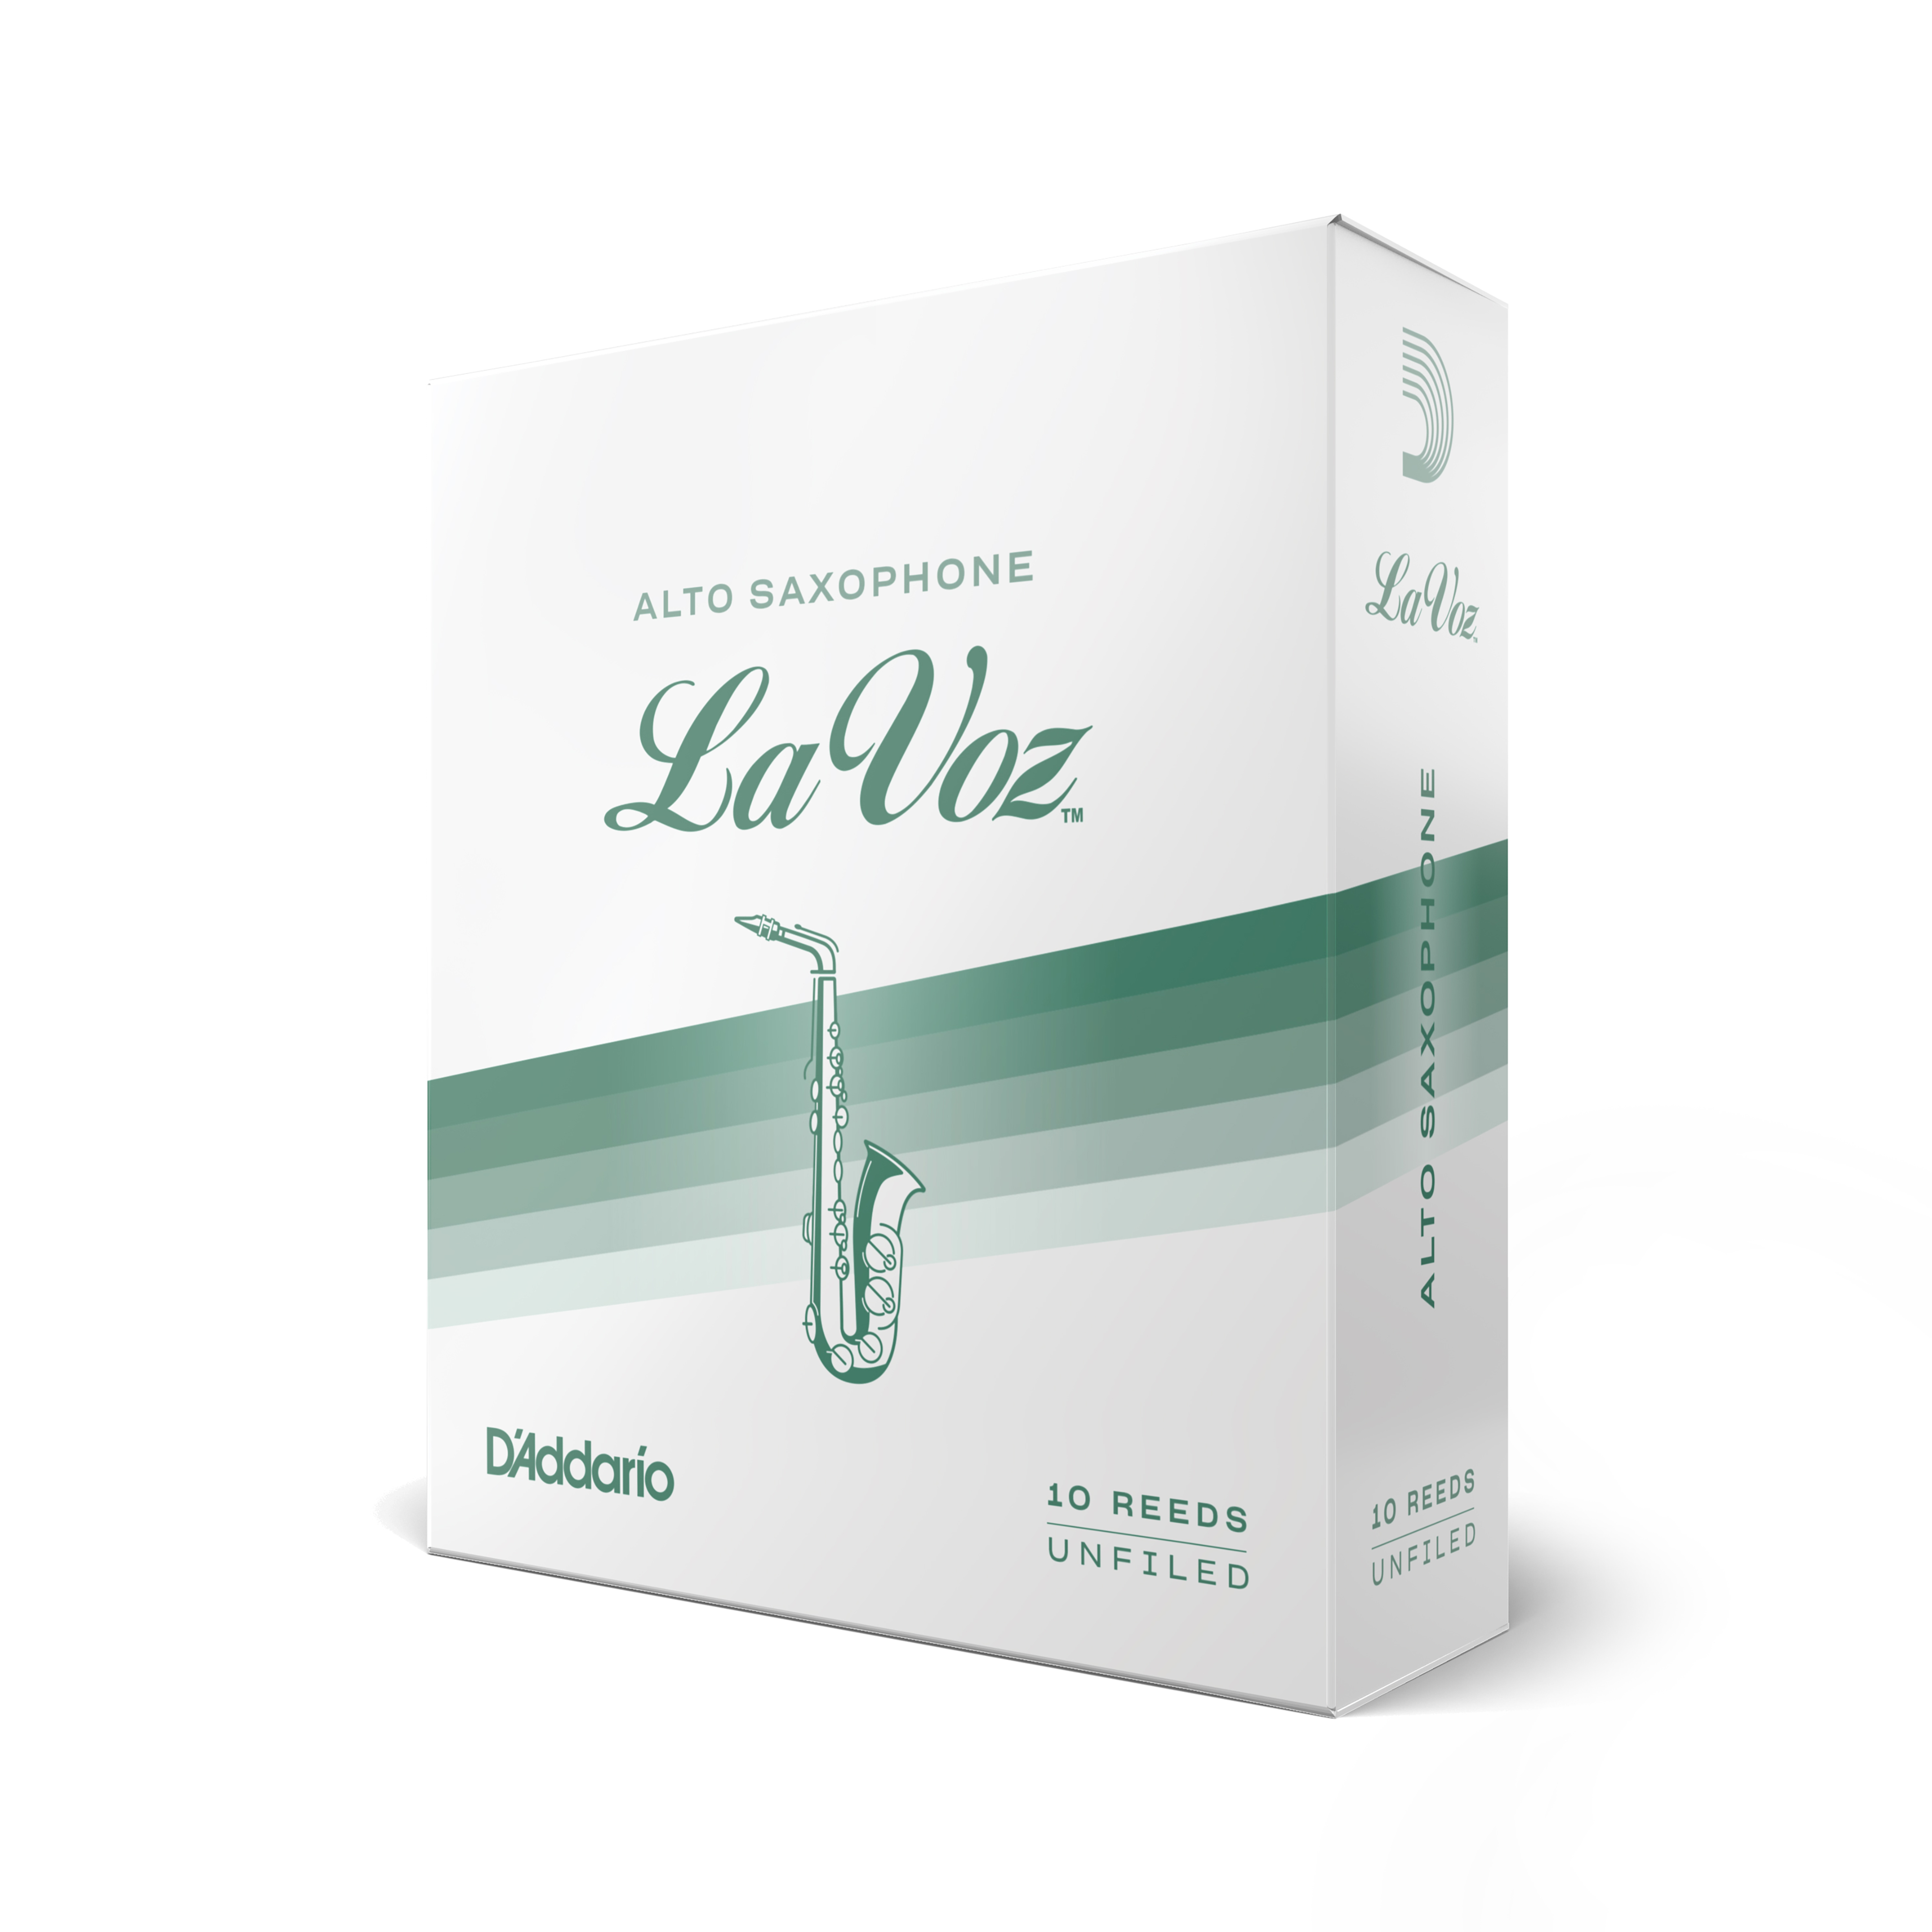 White with green box of ten  LaVoz by D'addario alto saxophone reeds